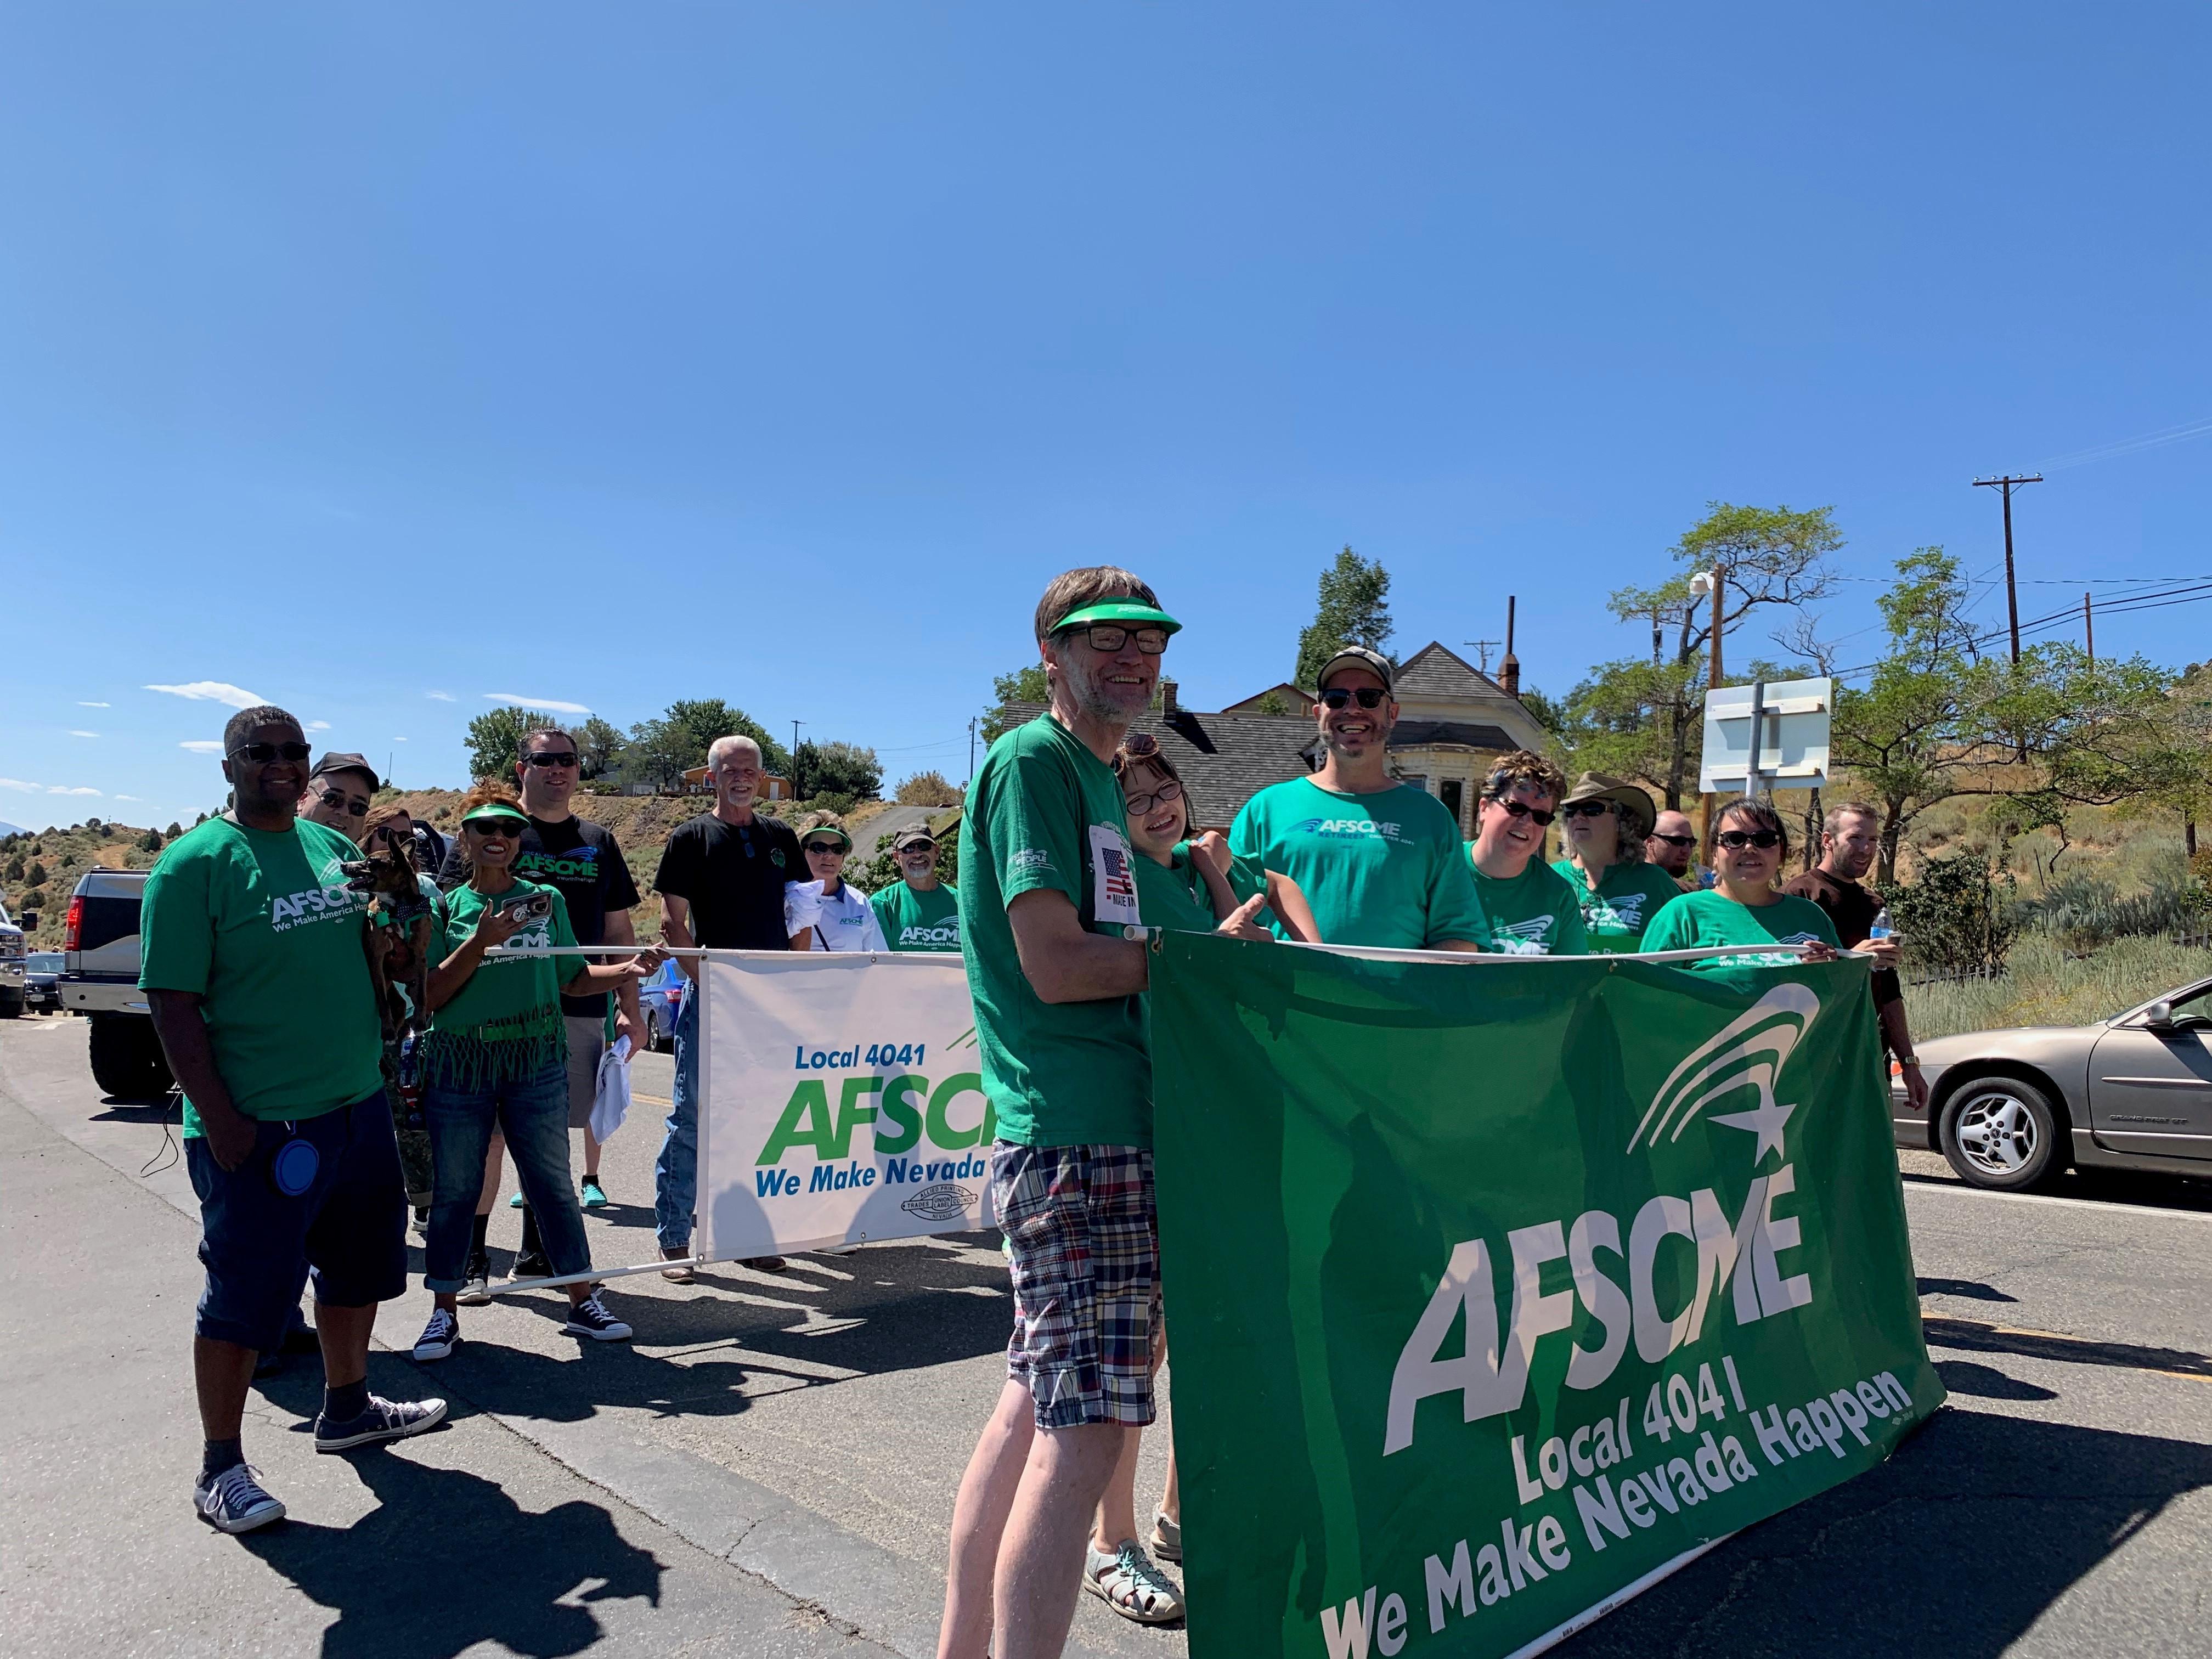 AFSCME Local 4041 at Virginia City Labor Day Parade